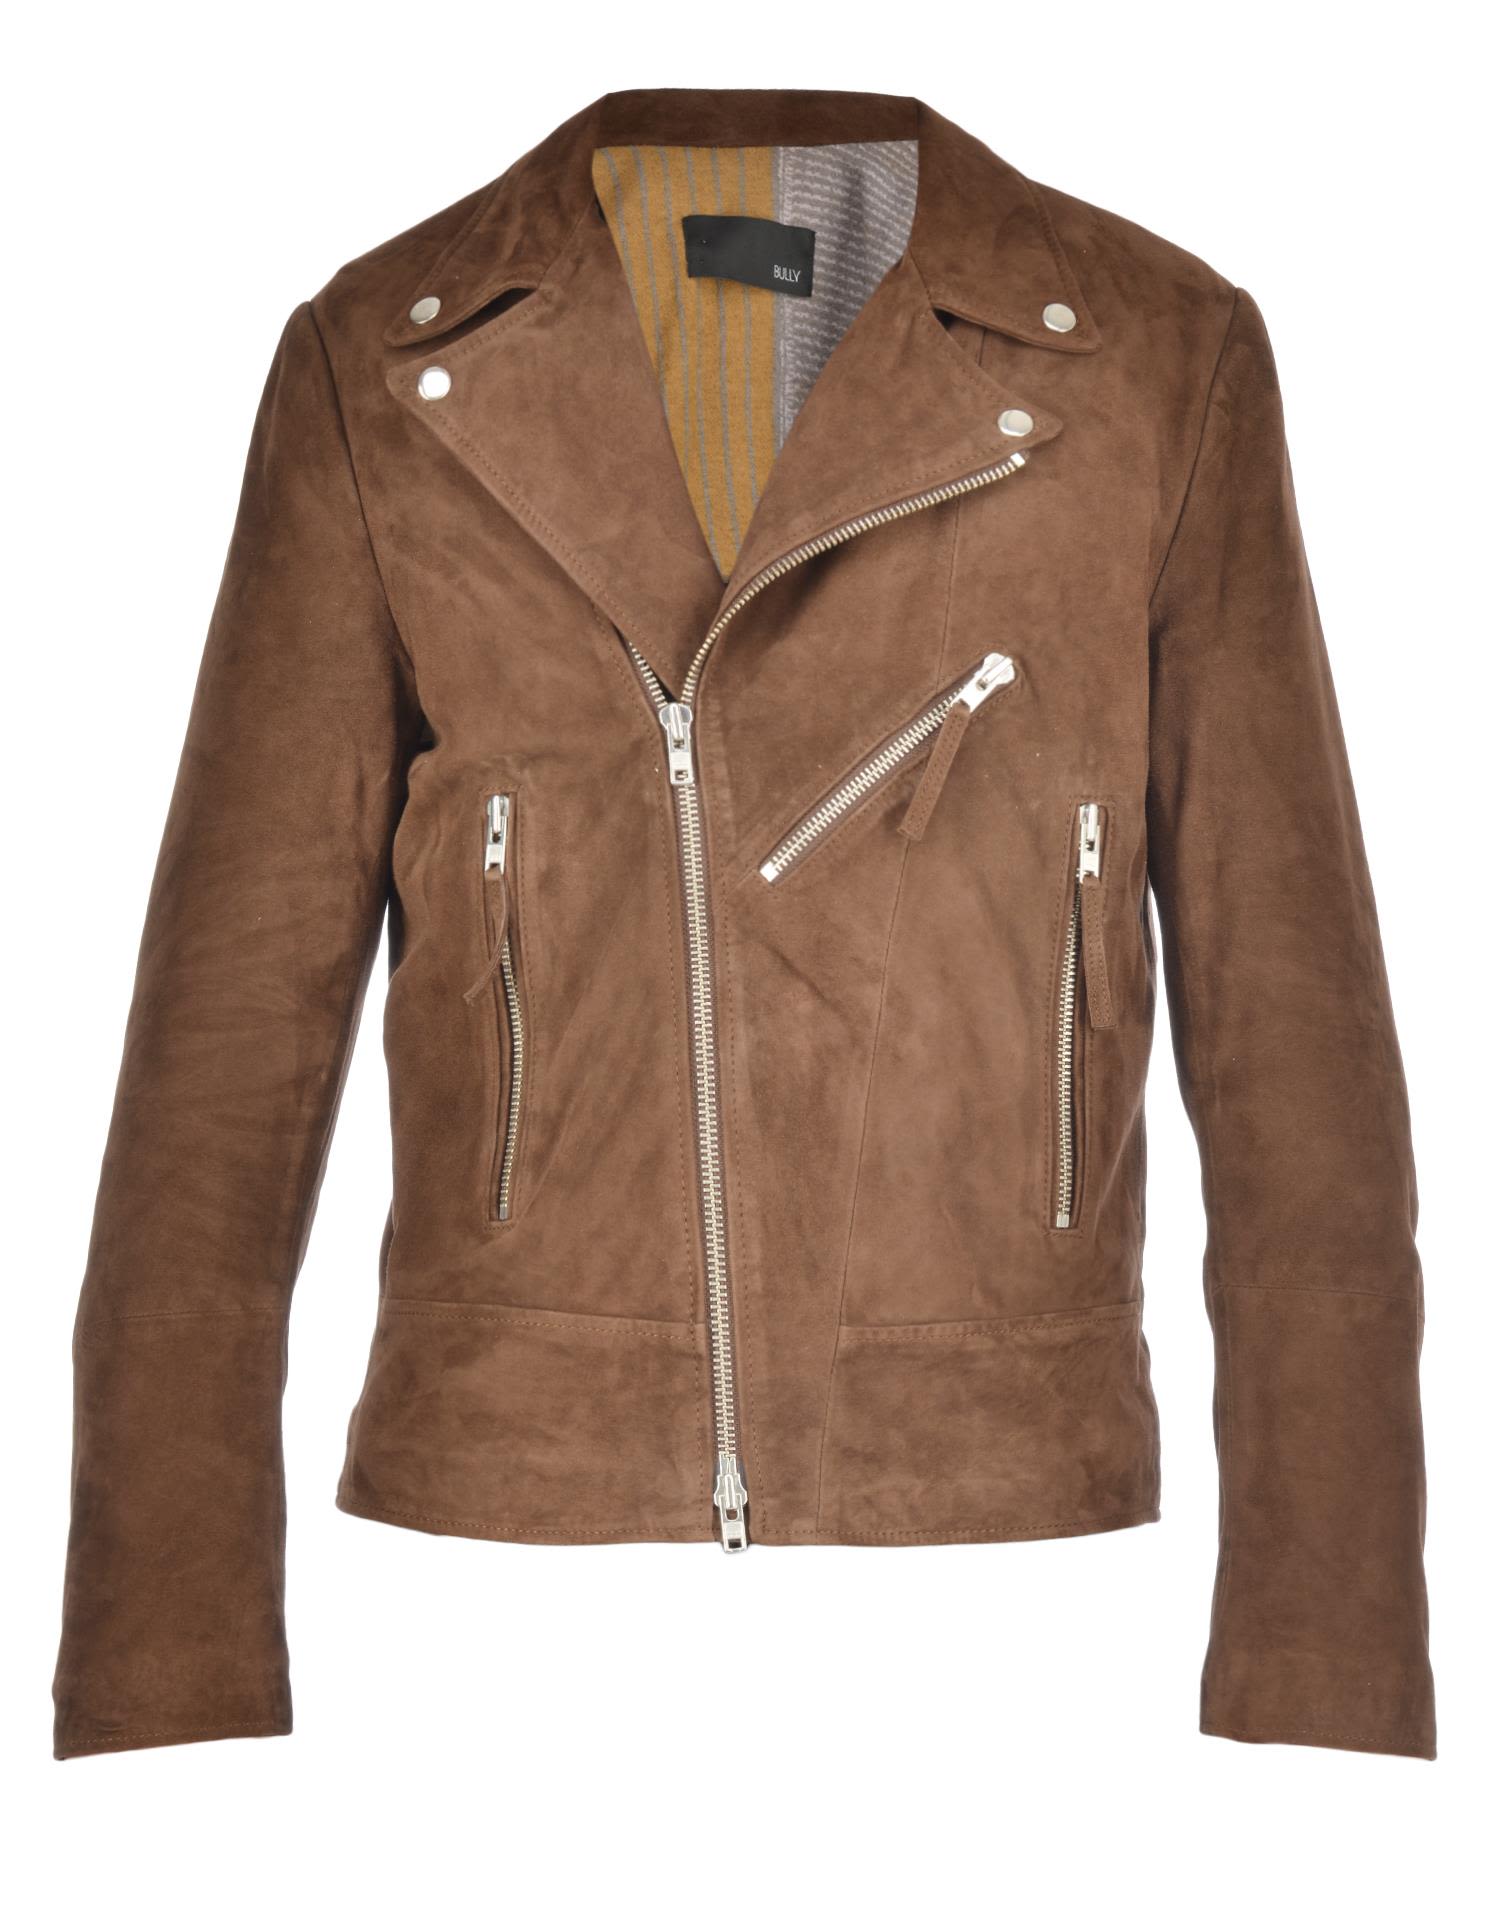 Bully - Bully Chiodo Jacket - BROWN, Men's Leather Jackets | Italist